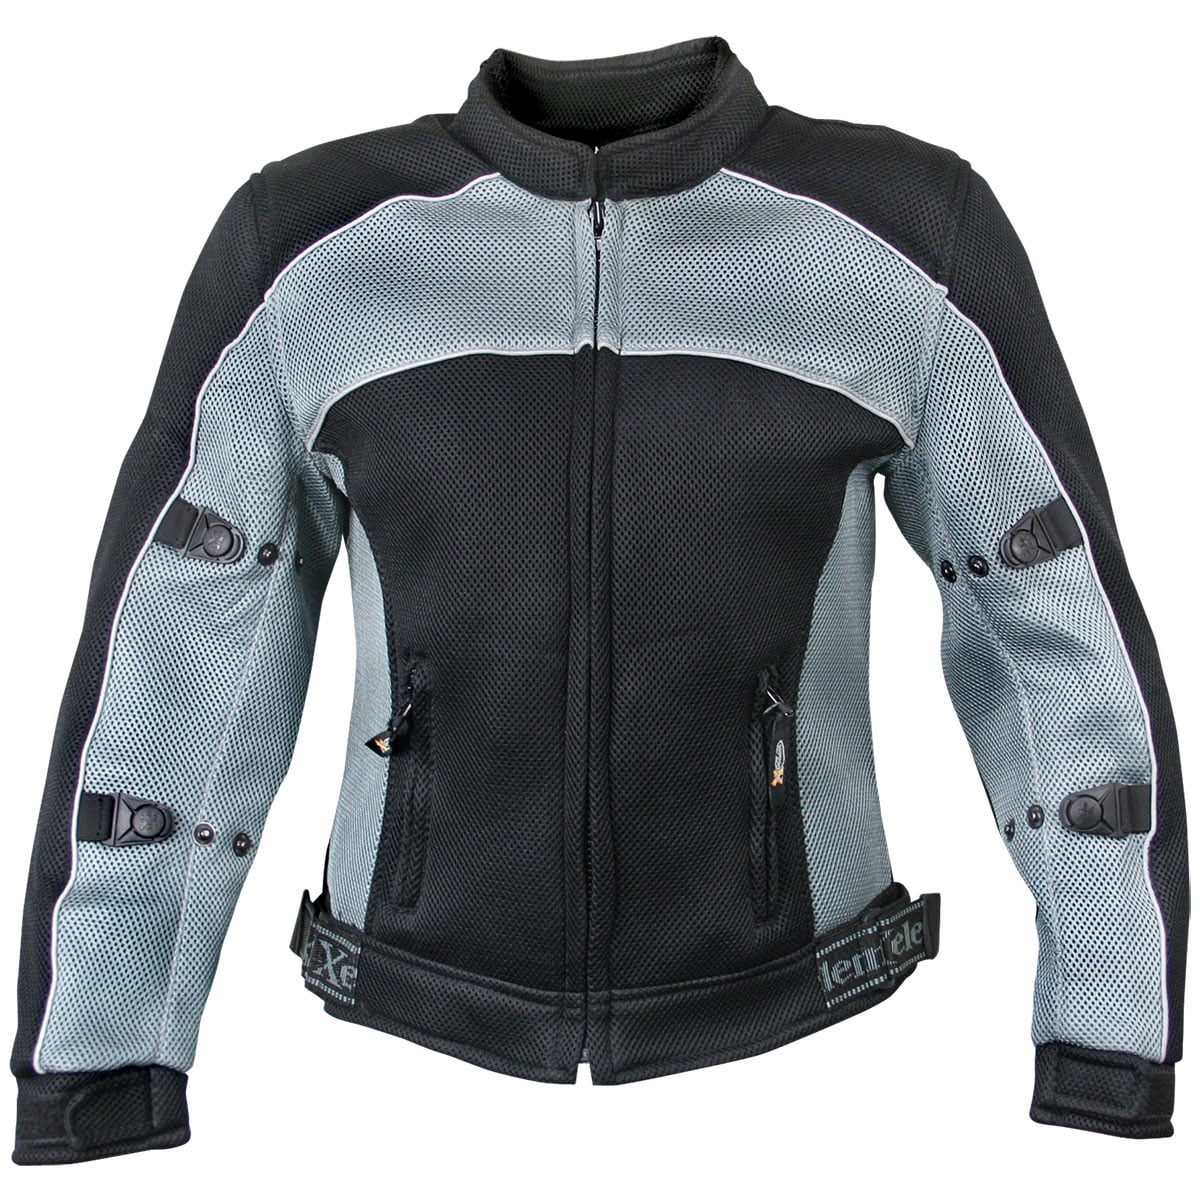 Xelement CF507 Women's 'Guardian' Black and Grey Mesh Jacket with X-Armor Protection 2X-Large 